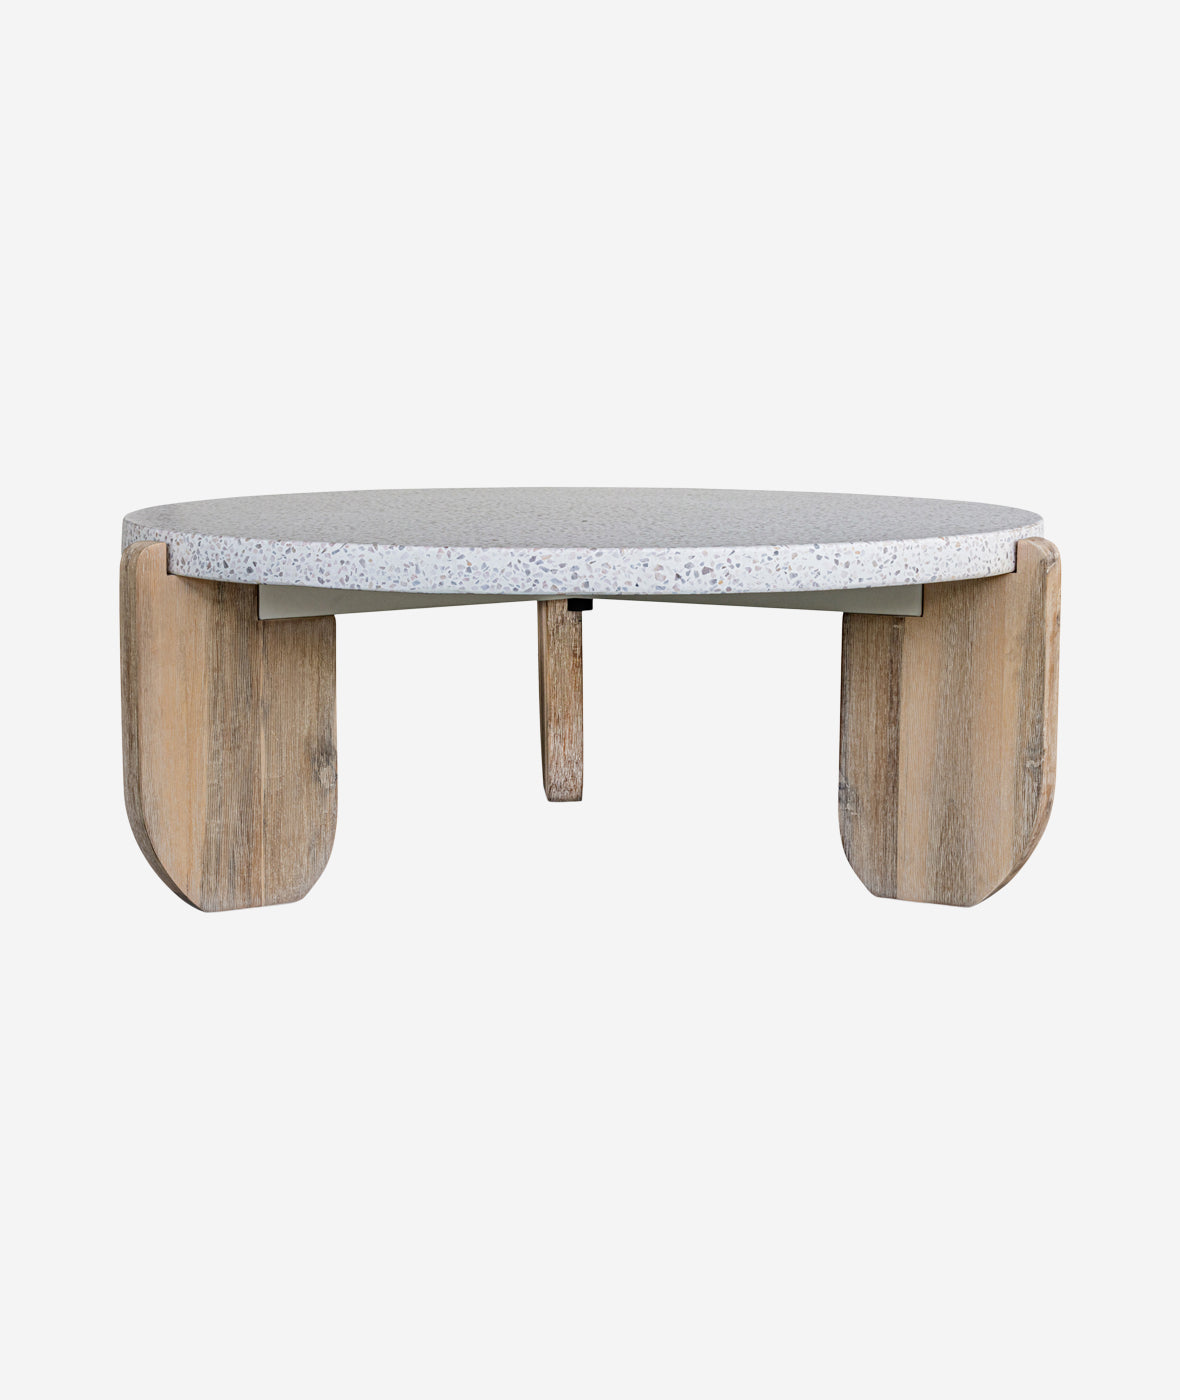 Wunder Coffee Table - More Options